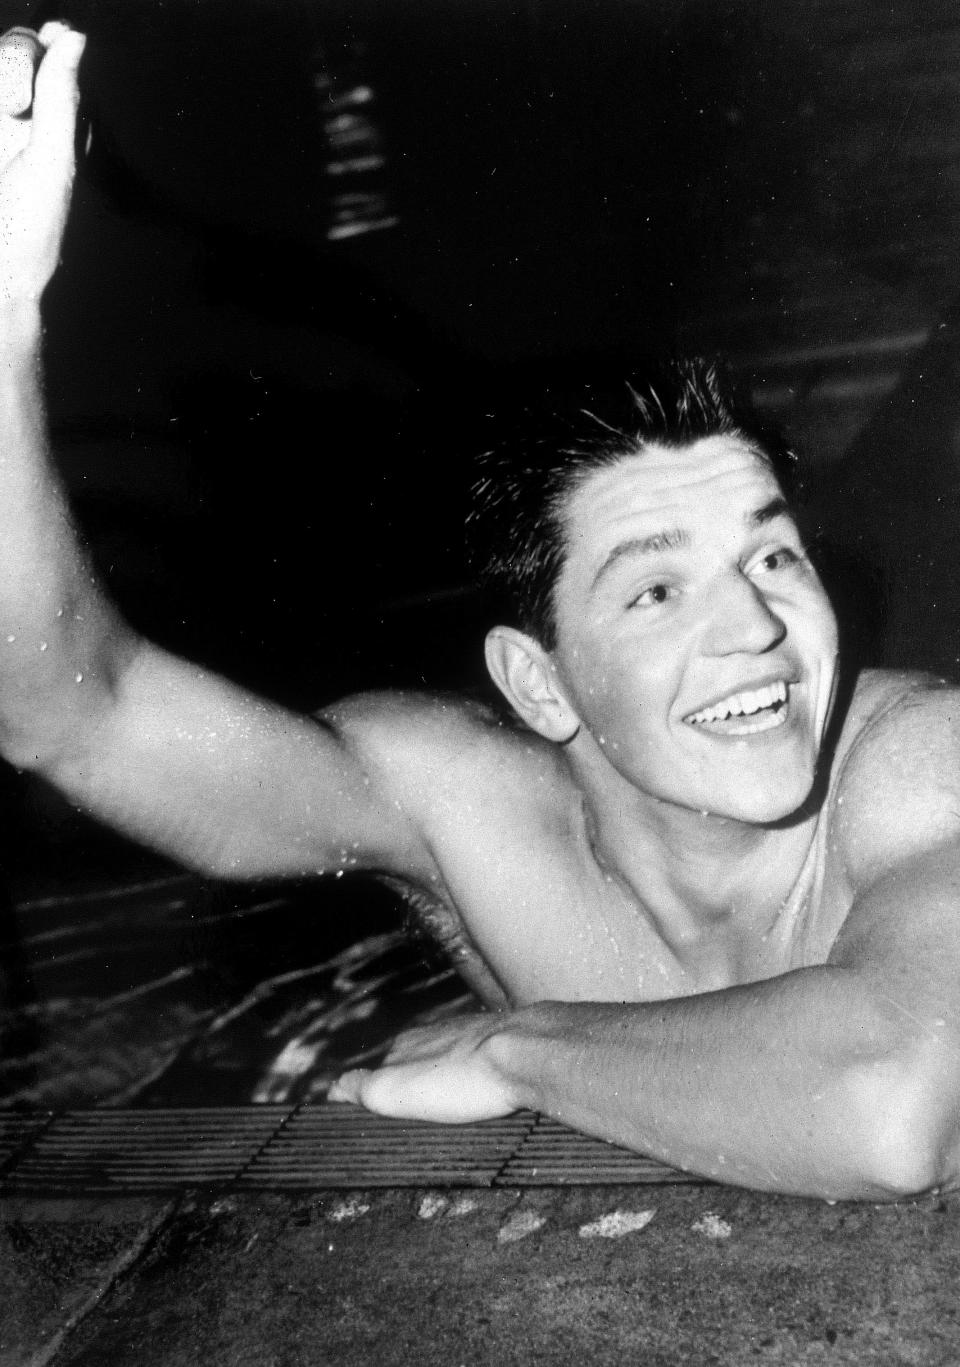 ROME, ITALY - 1960: John Konrads of Australia celebrates after winning the mens 1500m freestyle during the 1960 Rome Olympics held in Rome, Italy. Konrads was an Australian swimmer of the 1950s and 1960s, who won the 1500 m freestyle at the 1960 Summer Olympics in Rome. In his career, he set 26 individual world records. (Photo by Getty Images)